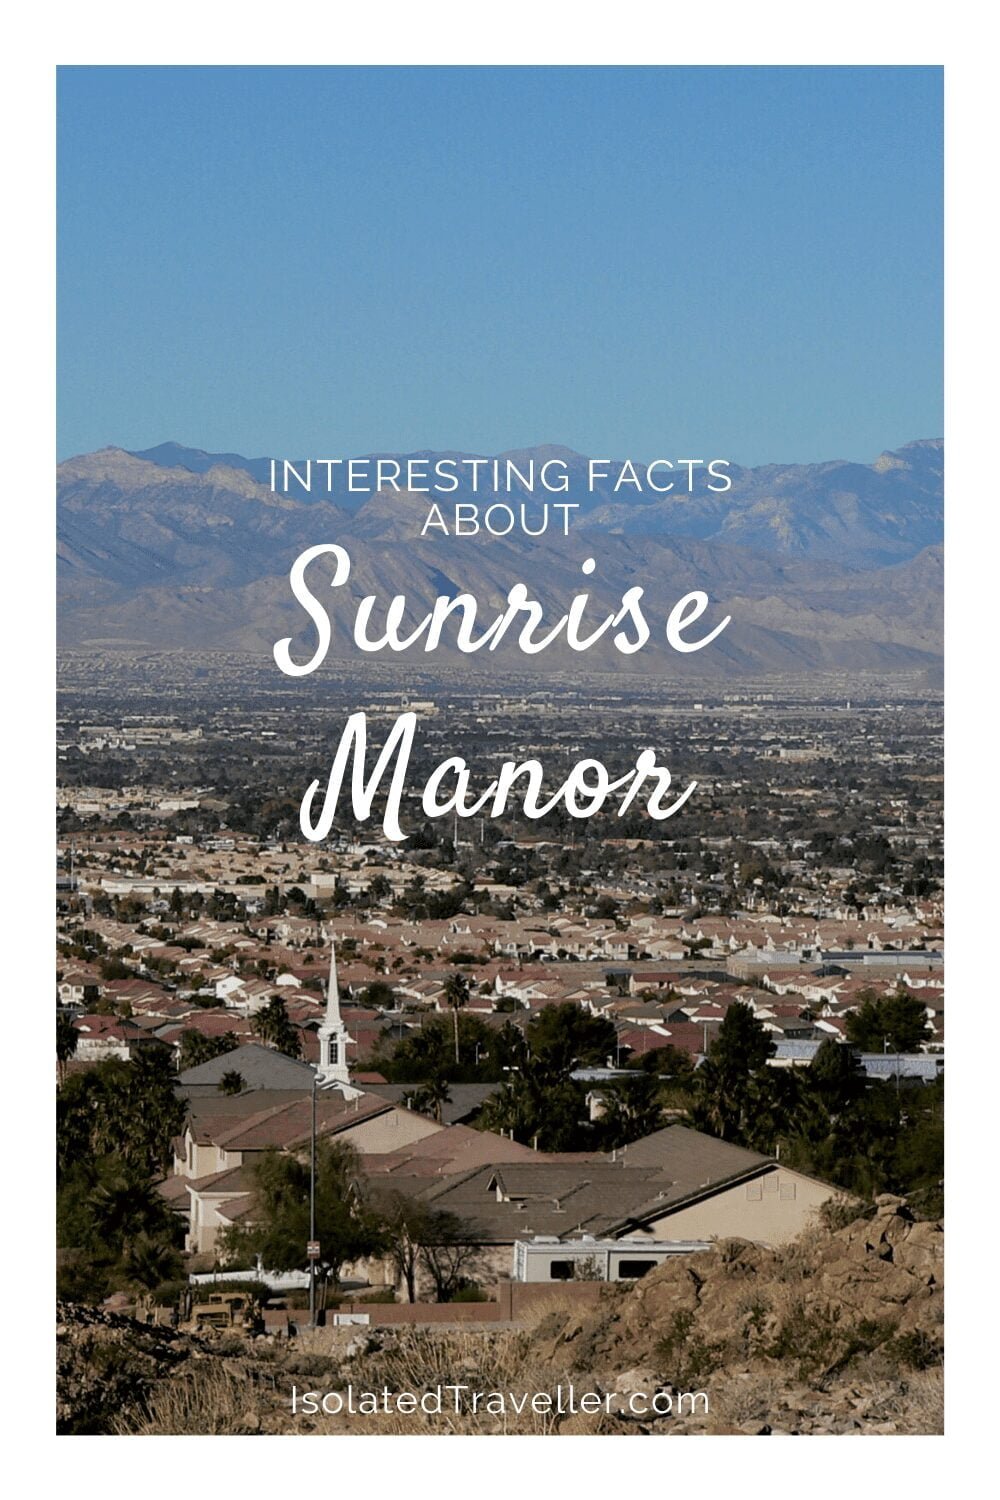 Facts About Sunrise Manor